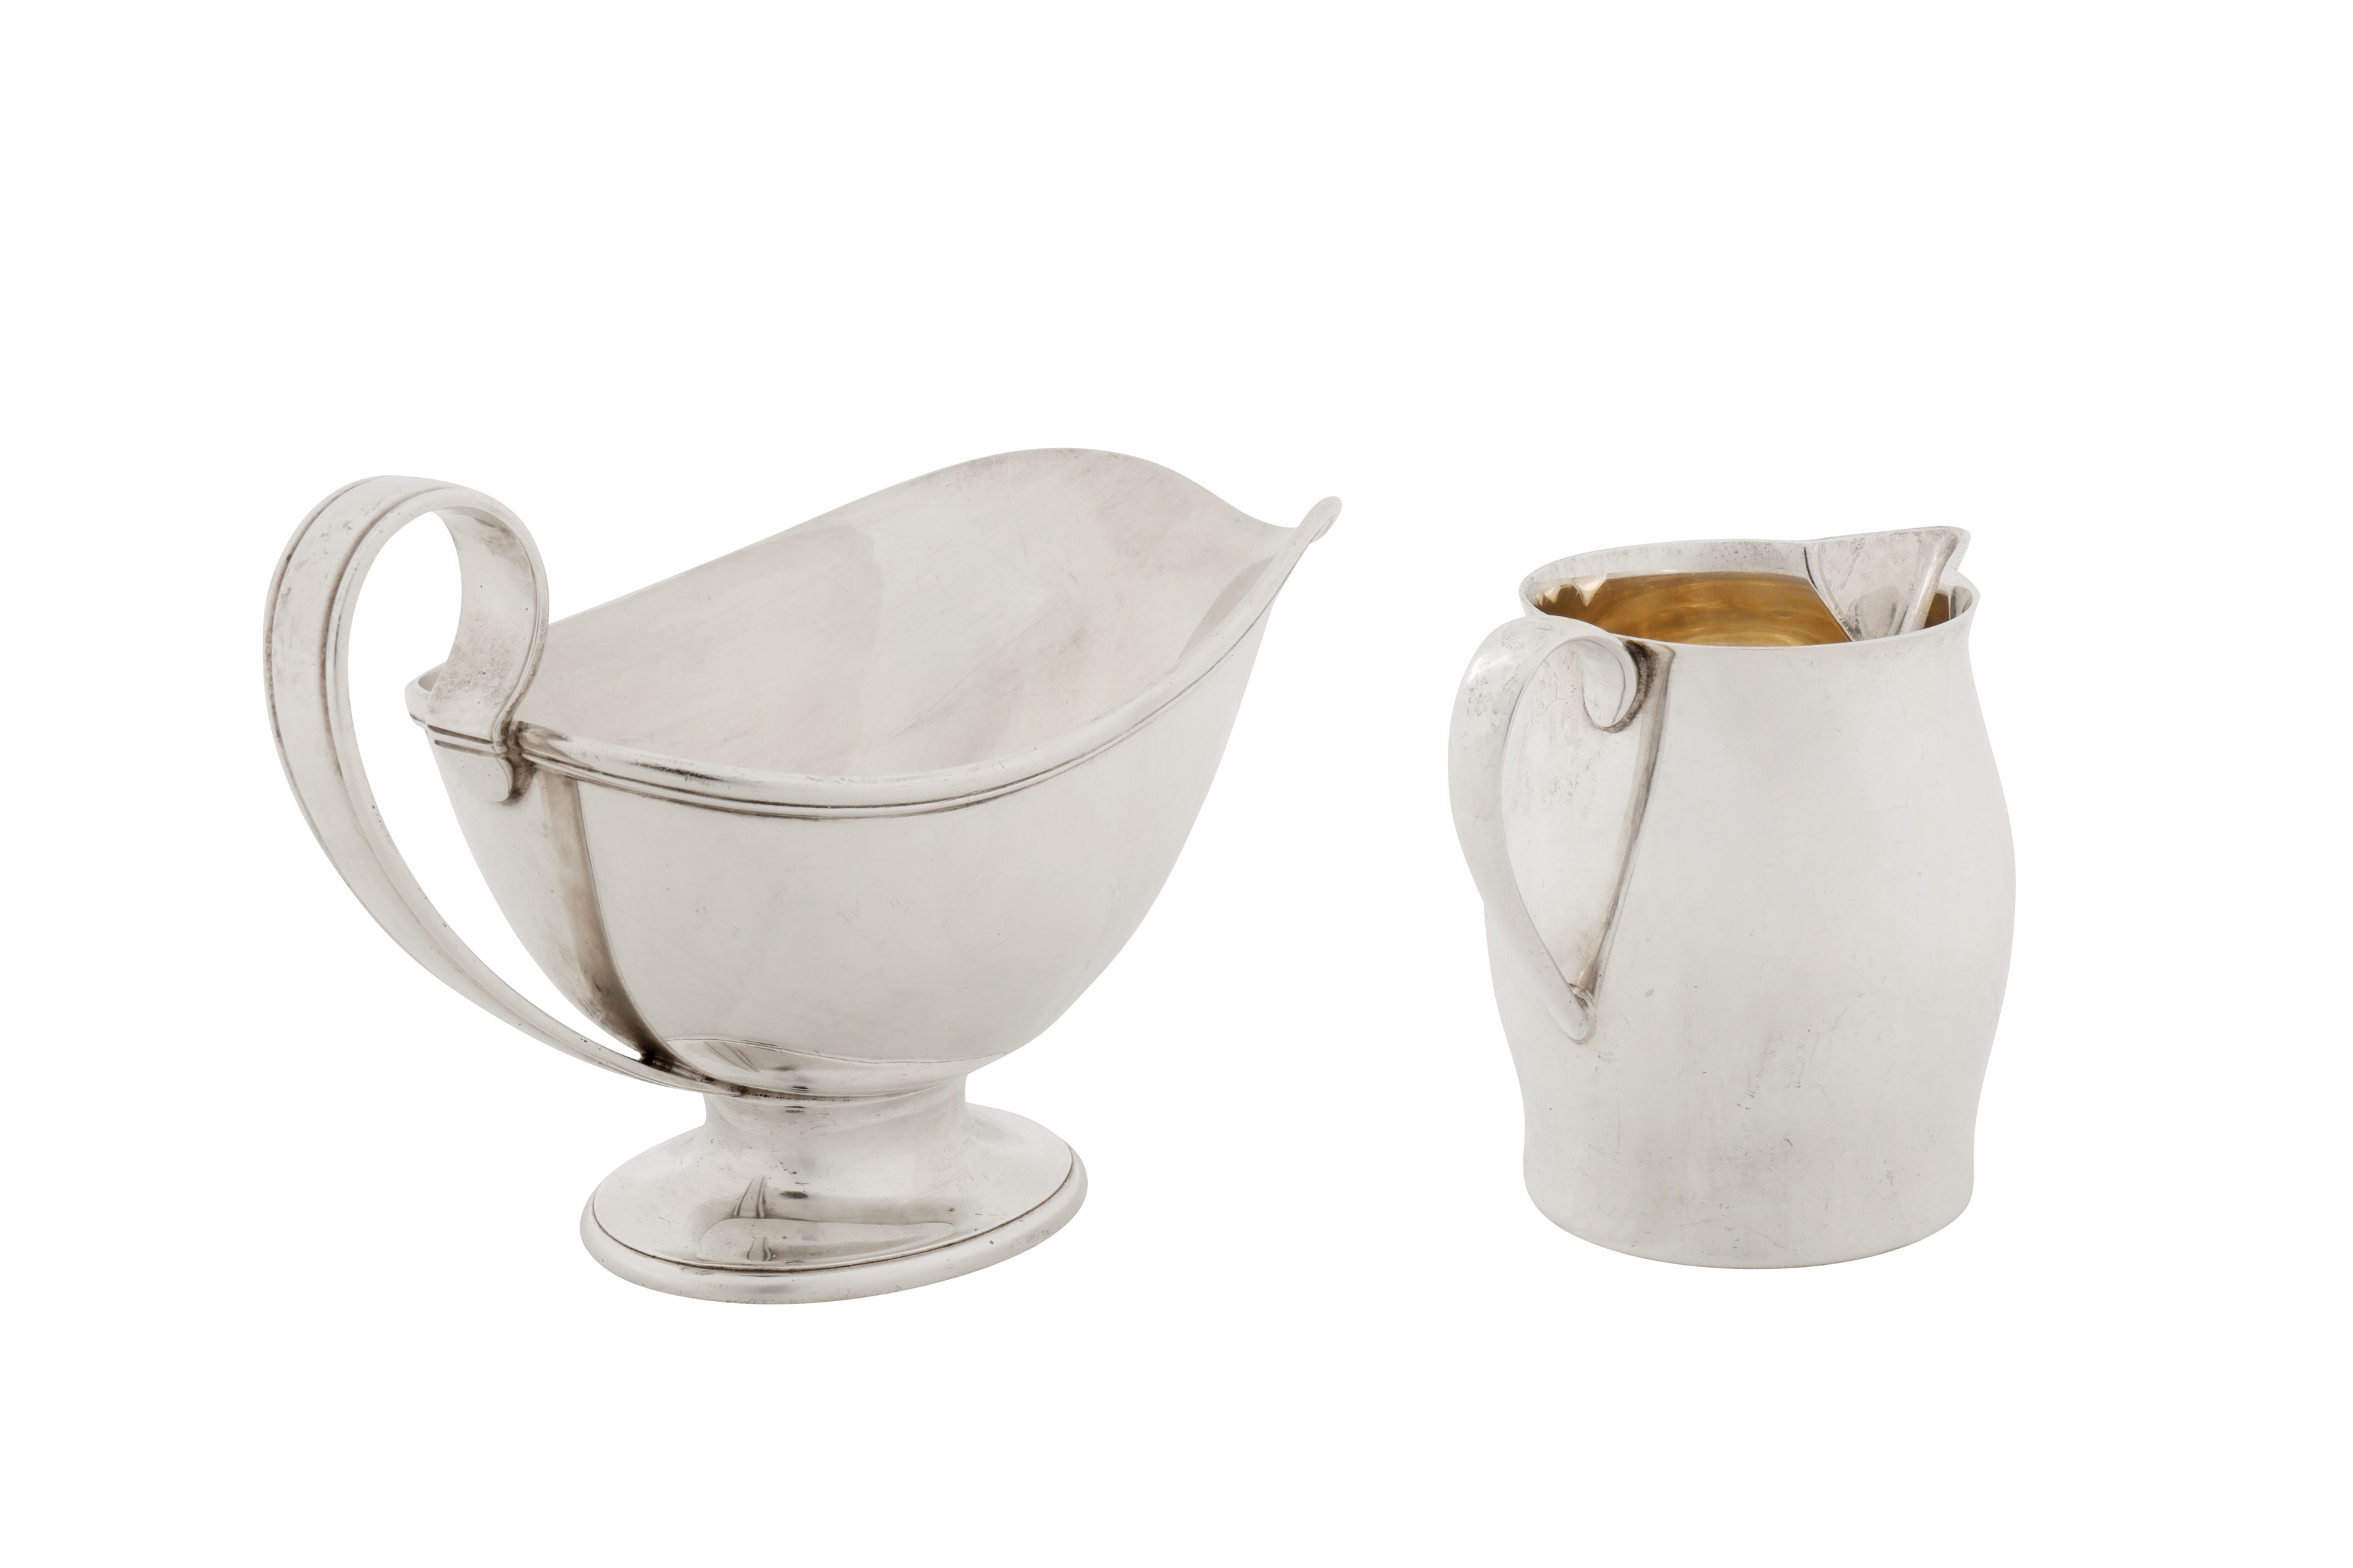 A mid-20th century American sterling silver sauce boat, New York circa 1970 by Tiffany - Image 6 of 6